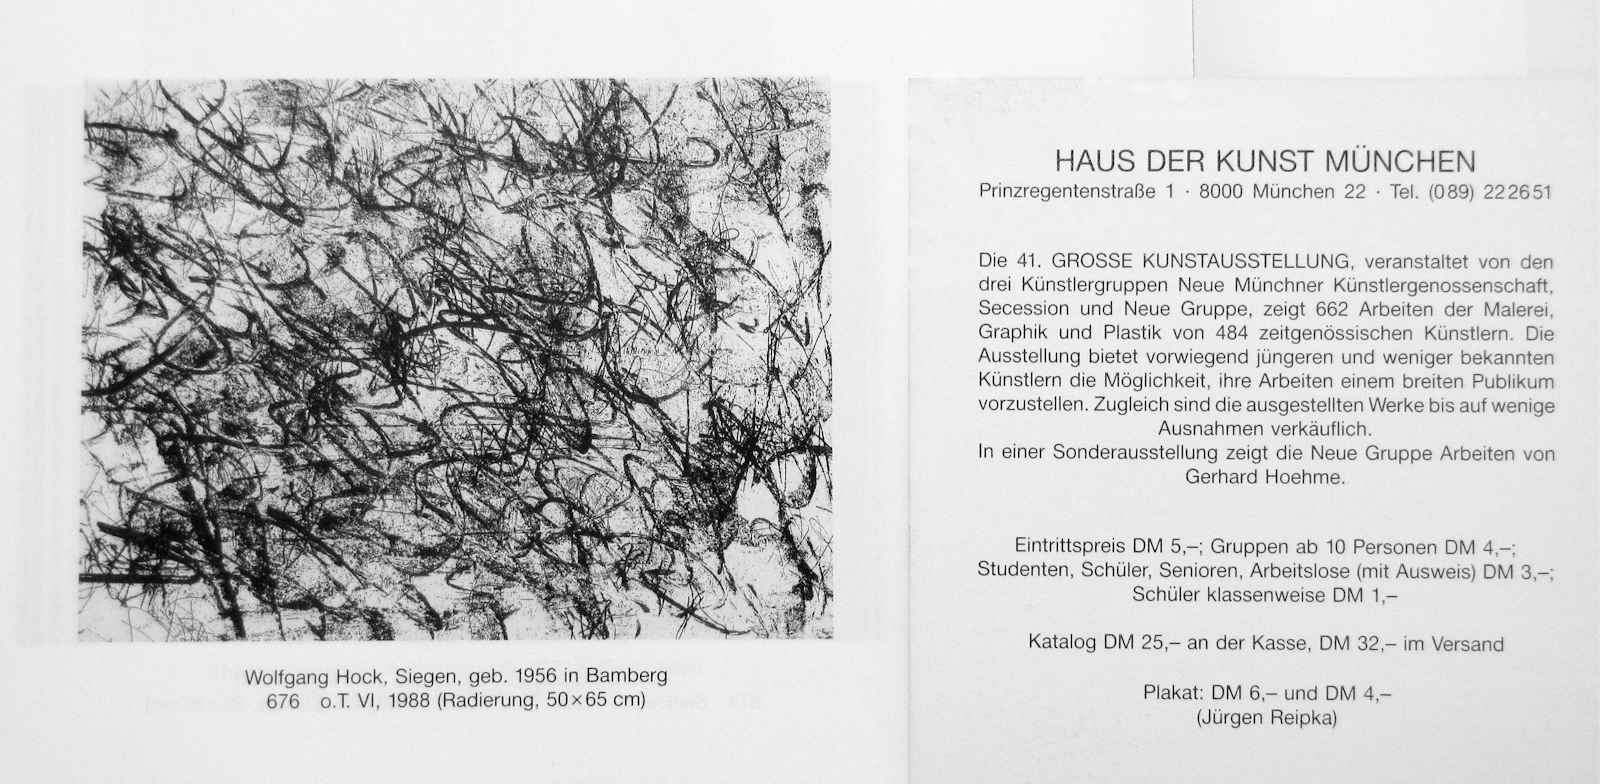 Exhibitions in Munique - Haus der Kunst in 1988 and 1989   Intaglios (aquatint etchings) on paper